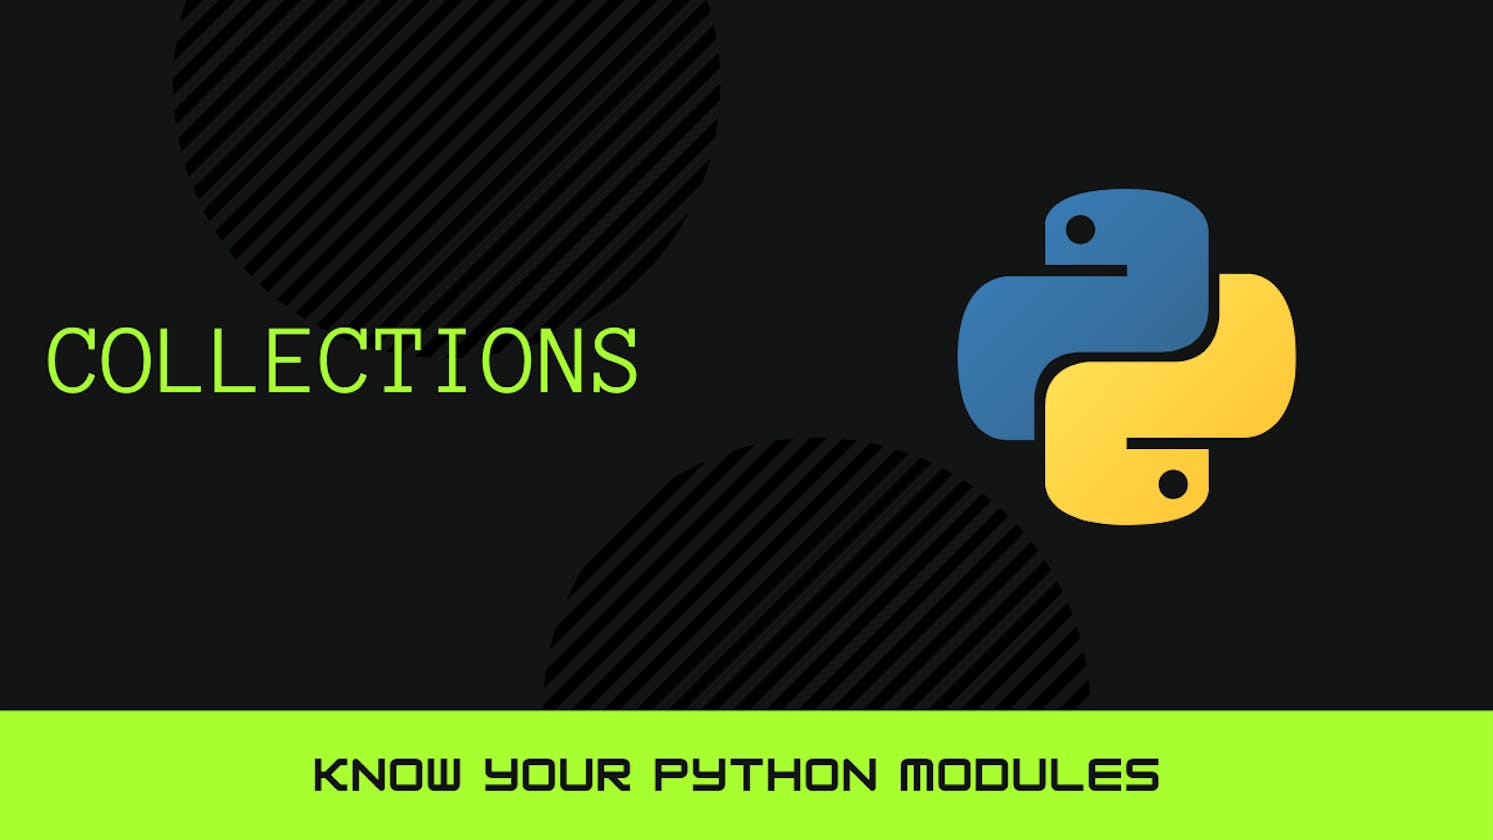 Know your Python modules: collections